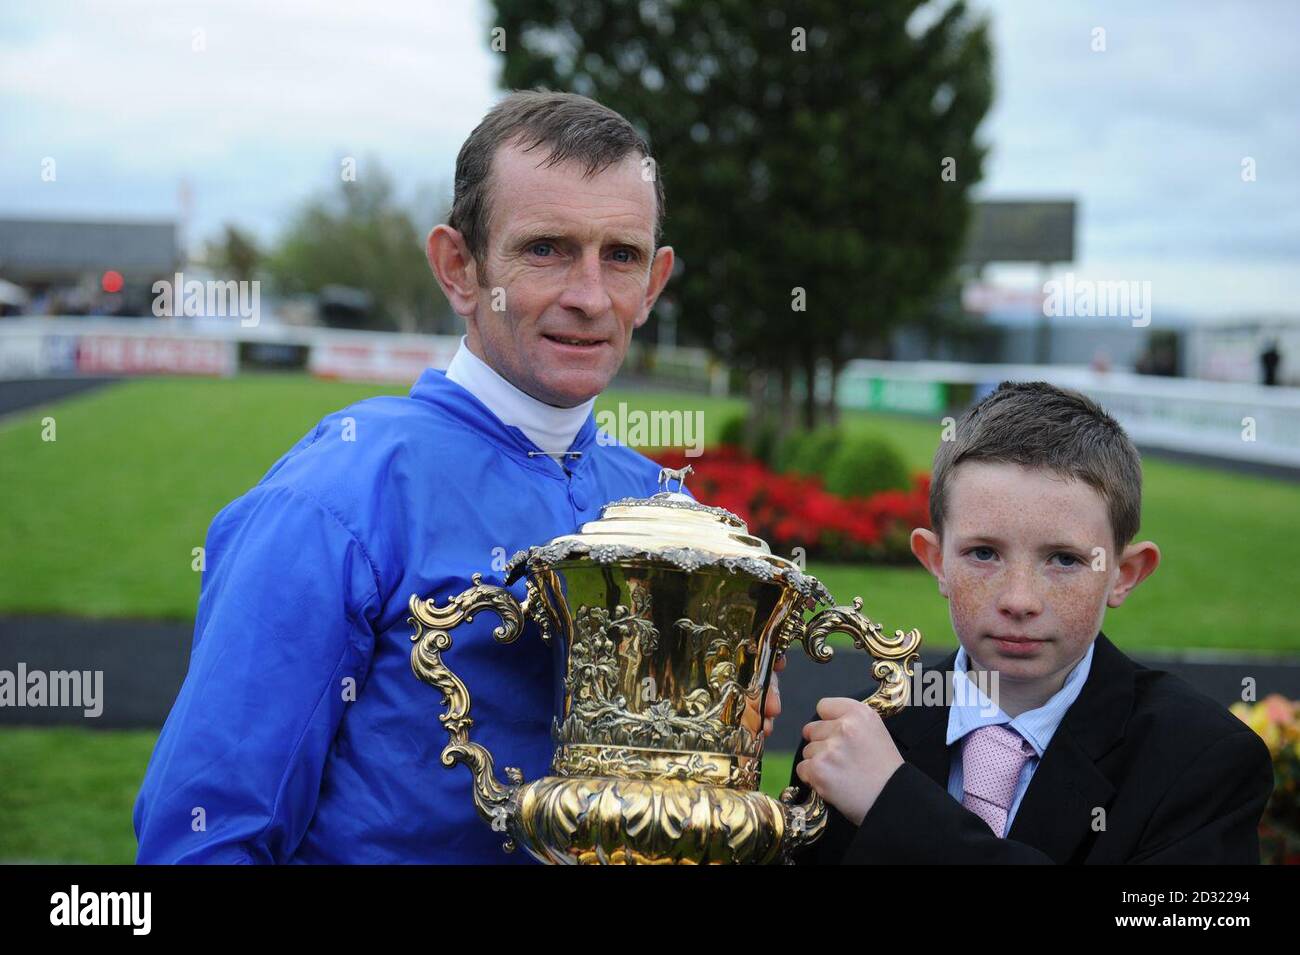 Kevin Manning poses with his son James after winning The Goffs Vincent O'Brien Stakes at Curragh Racecourse, Curragh. Stock Photo